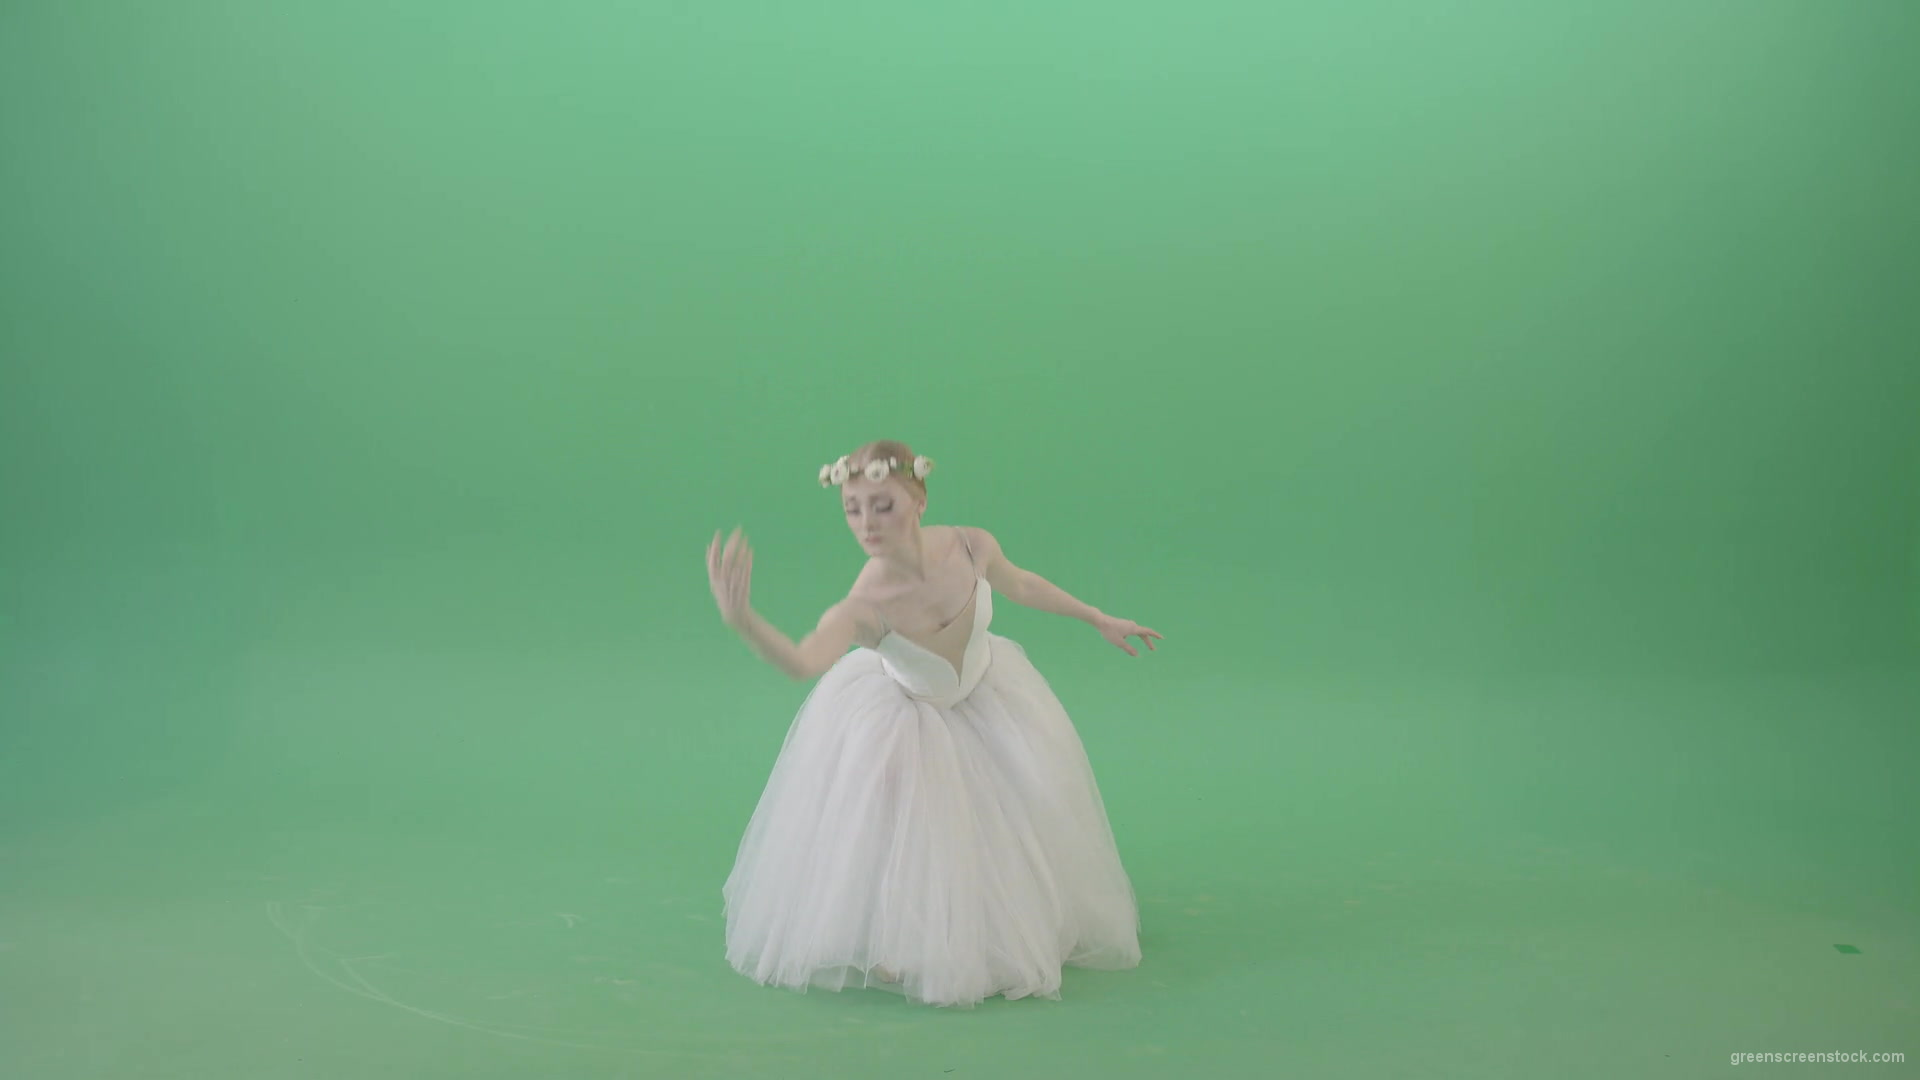 Sensuality-Choreographer-making-regards-in-white-dress-amazing-ballet-girl-isolated-on-green-screen-4K-Video-Footage-1920_004 Green Screen Stock